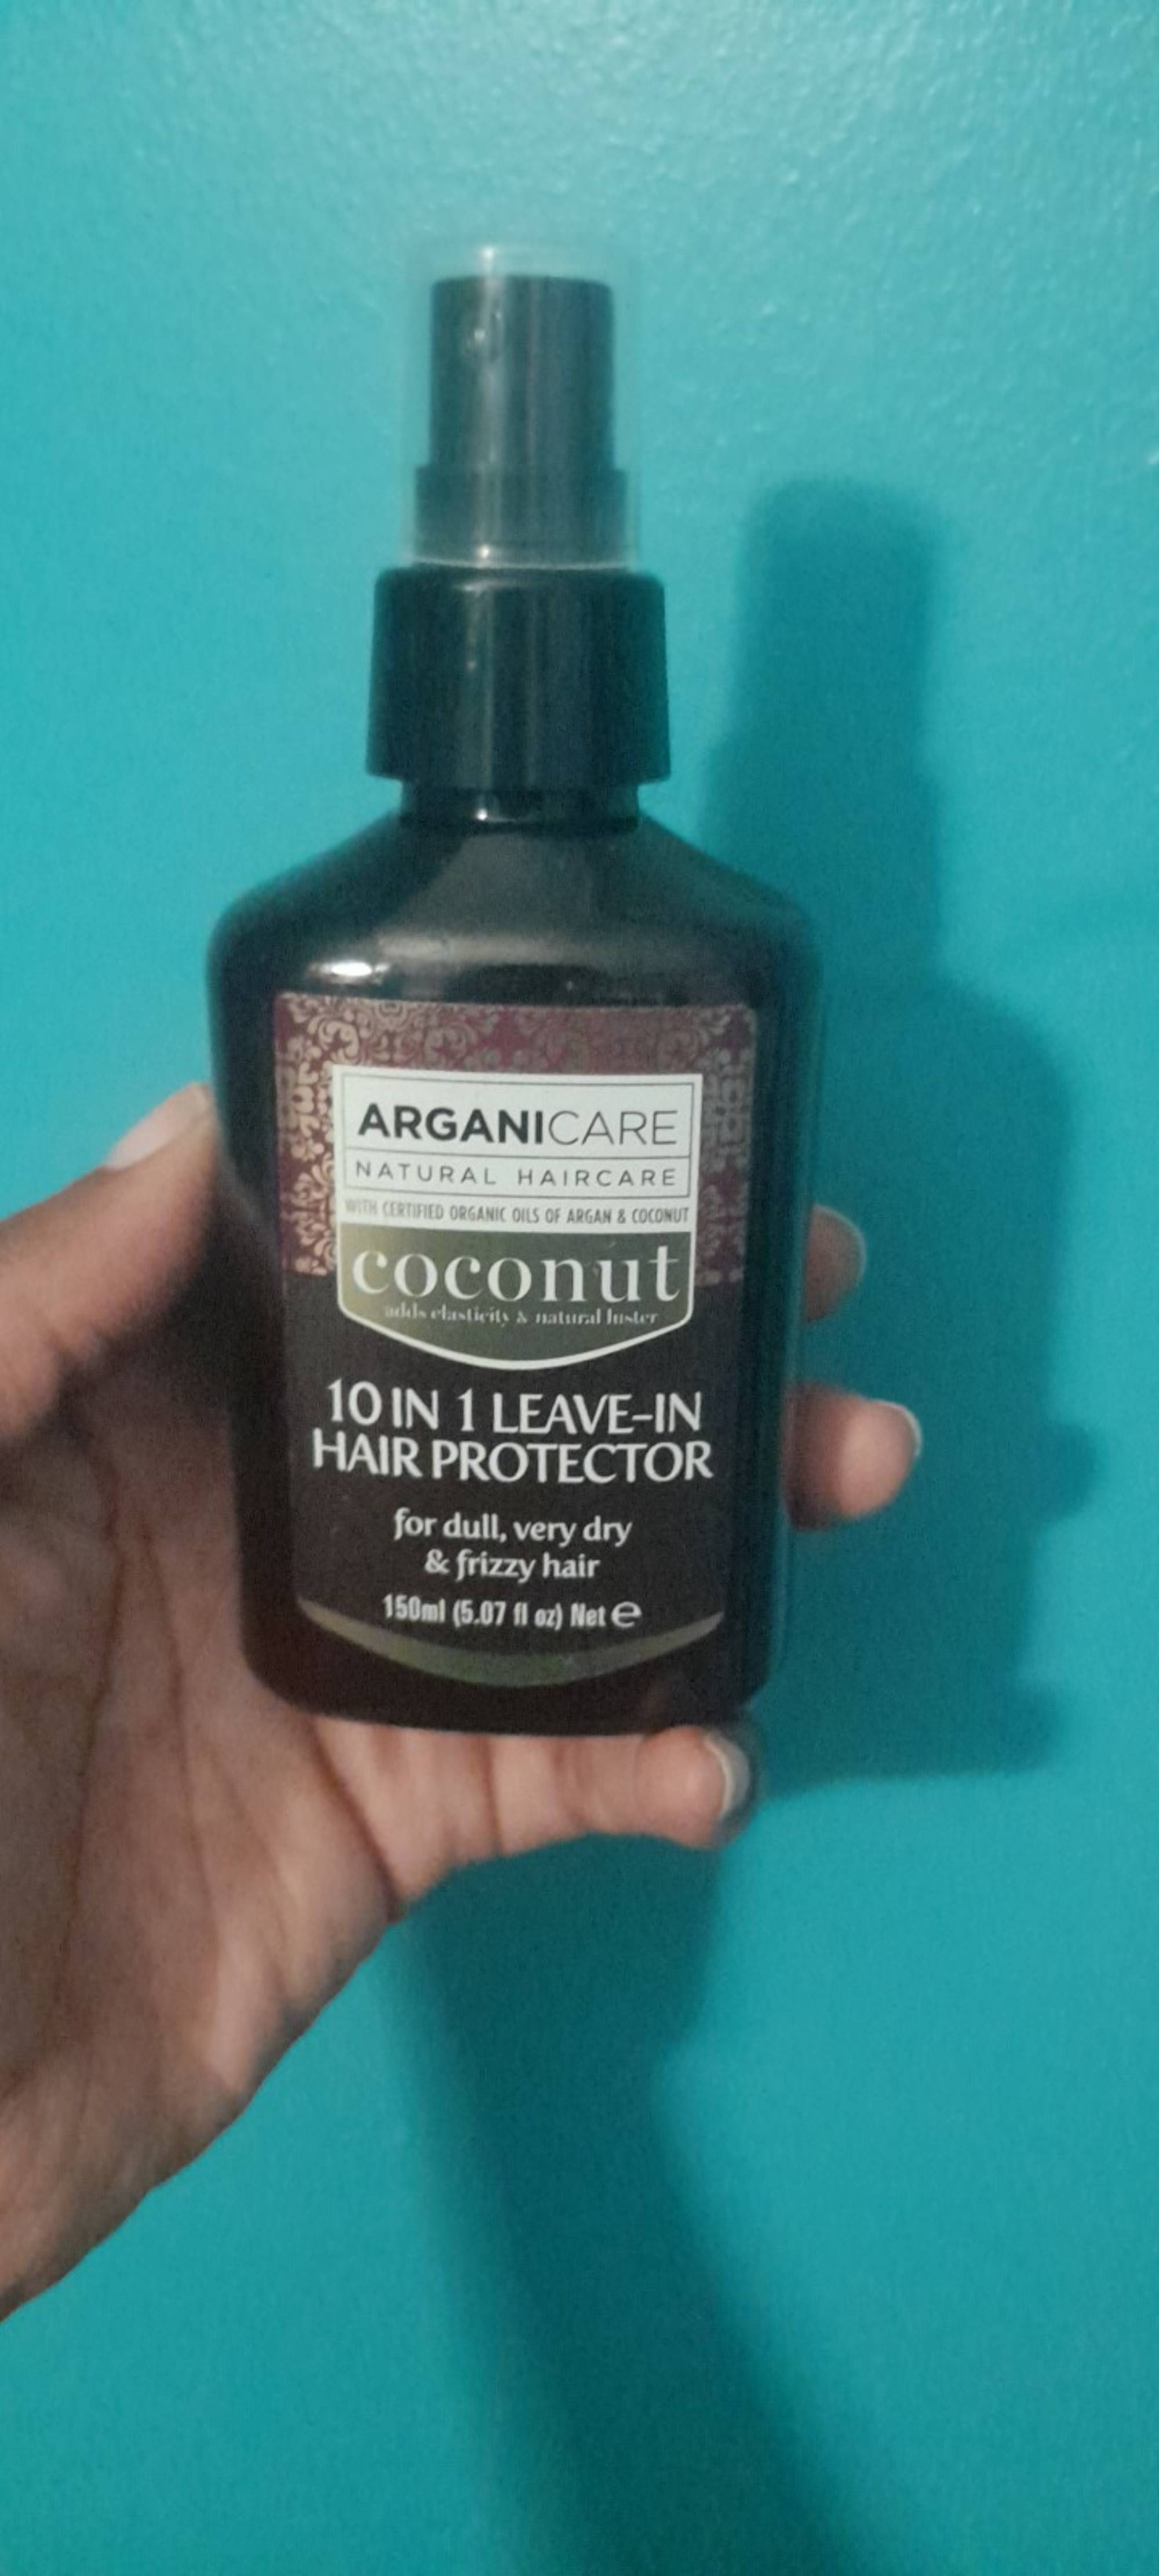 ARGANICARE - Coconut - 10 in 1 leave-in hair protector